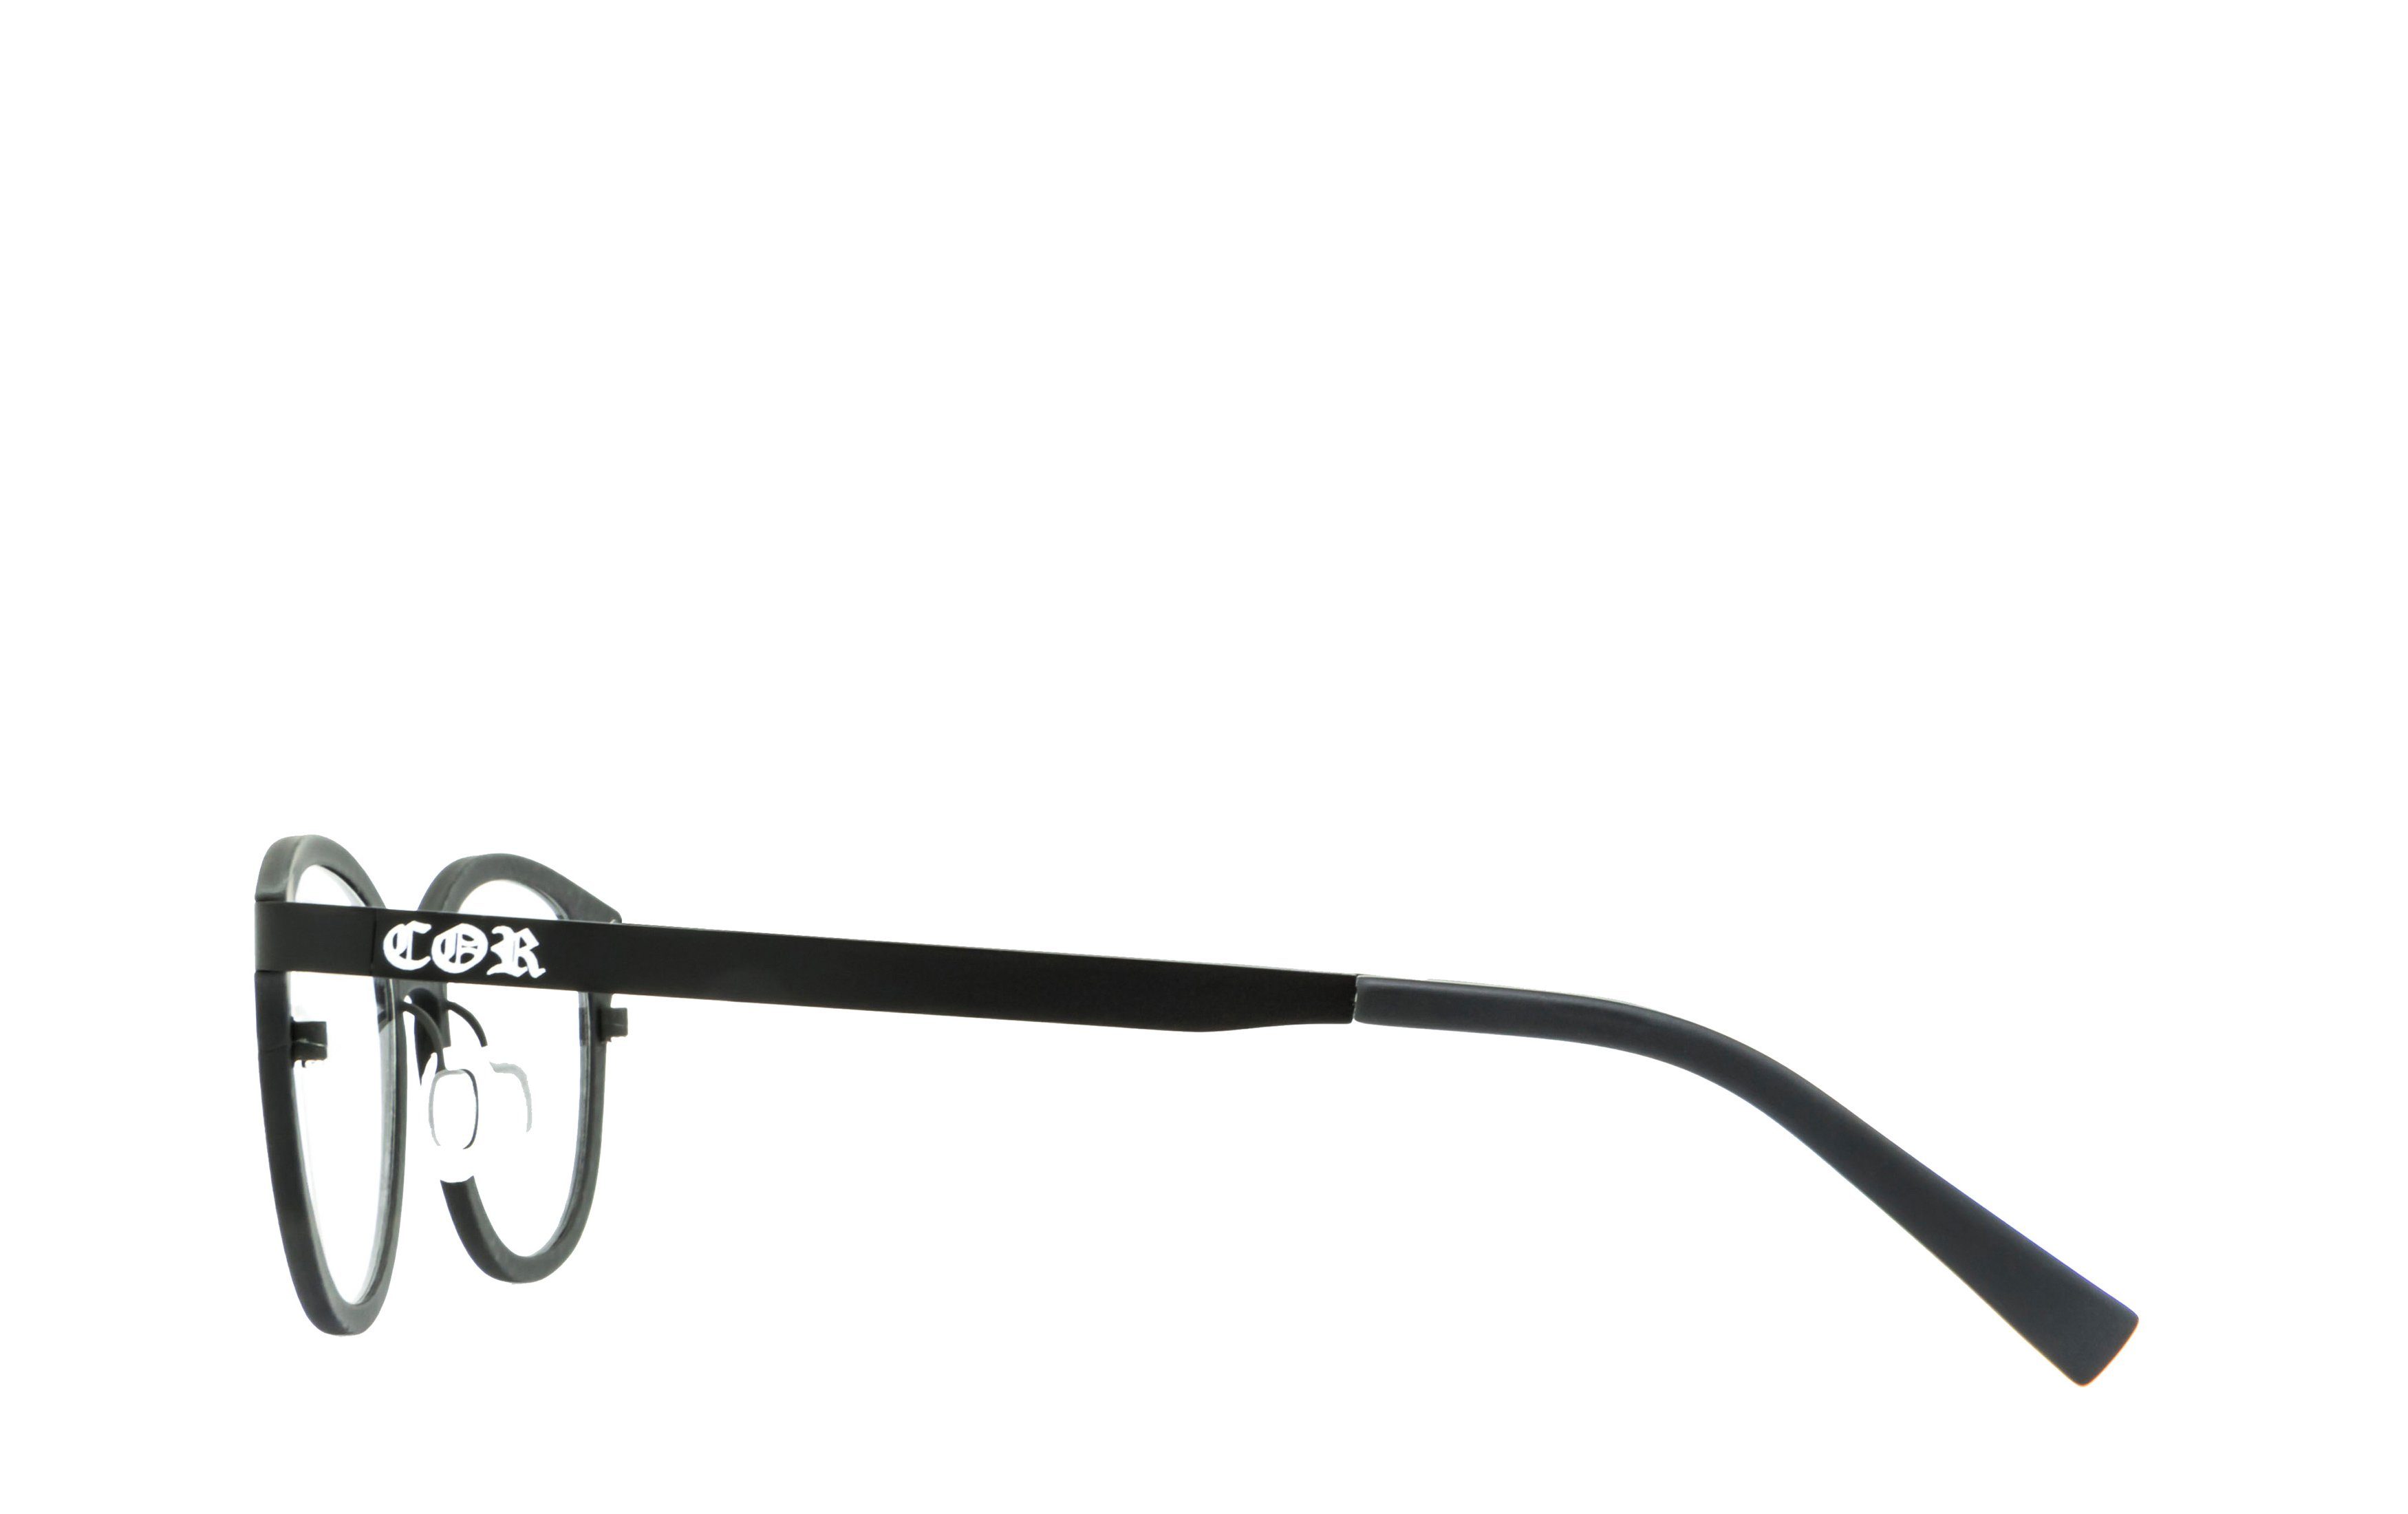 COR Carbon Brillengestell mit Brille COR069b, Holz-Look